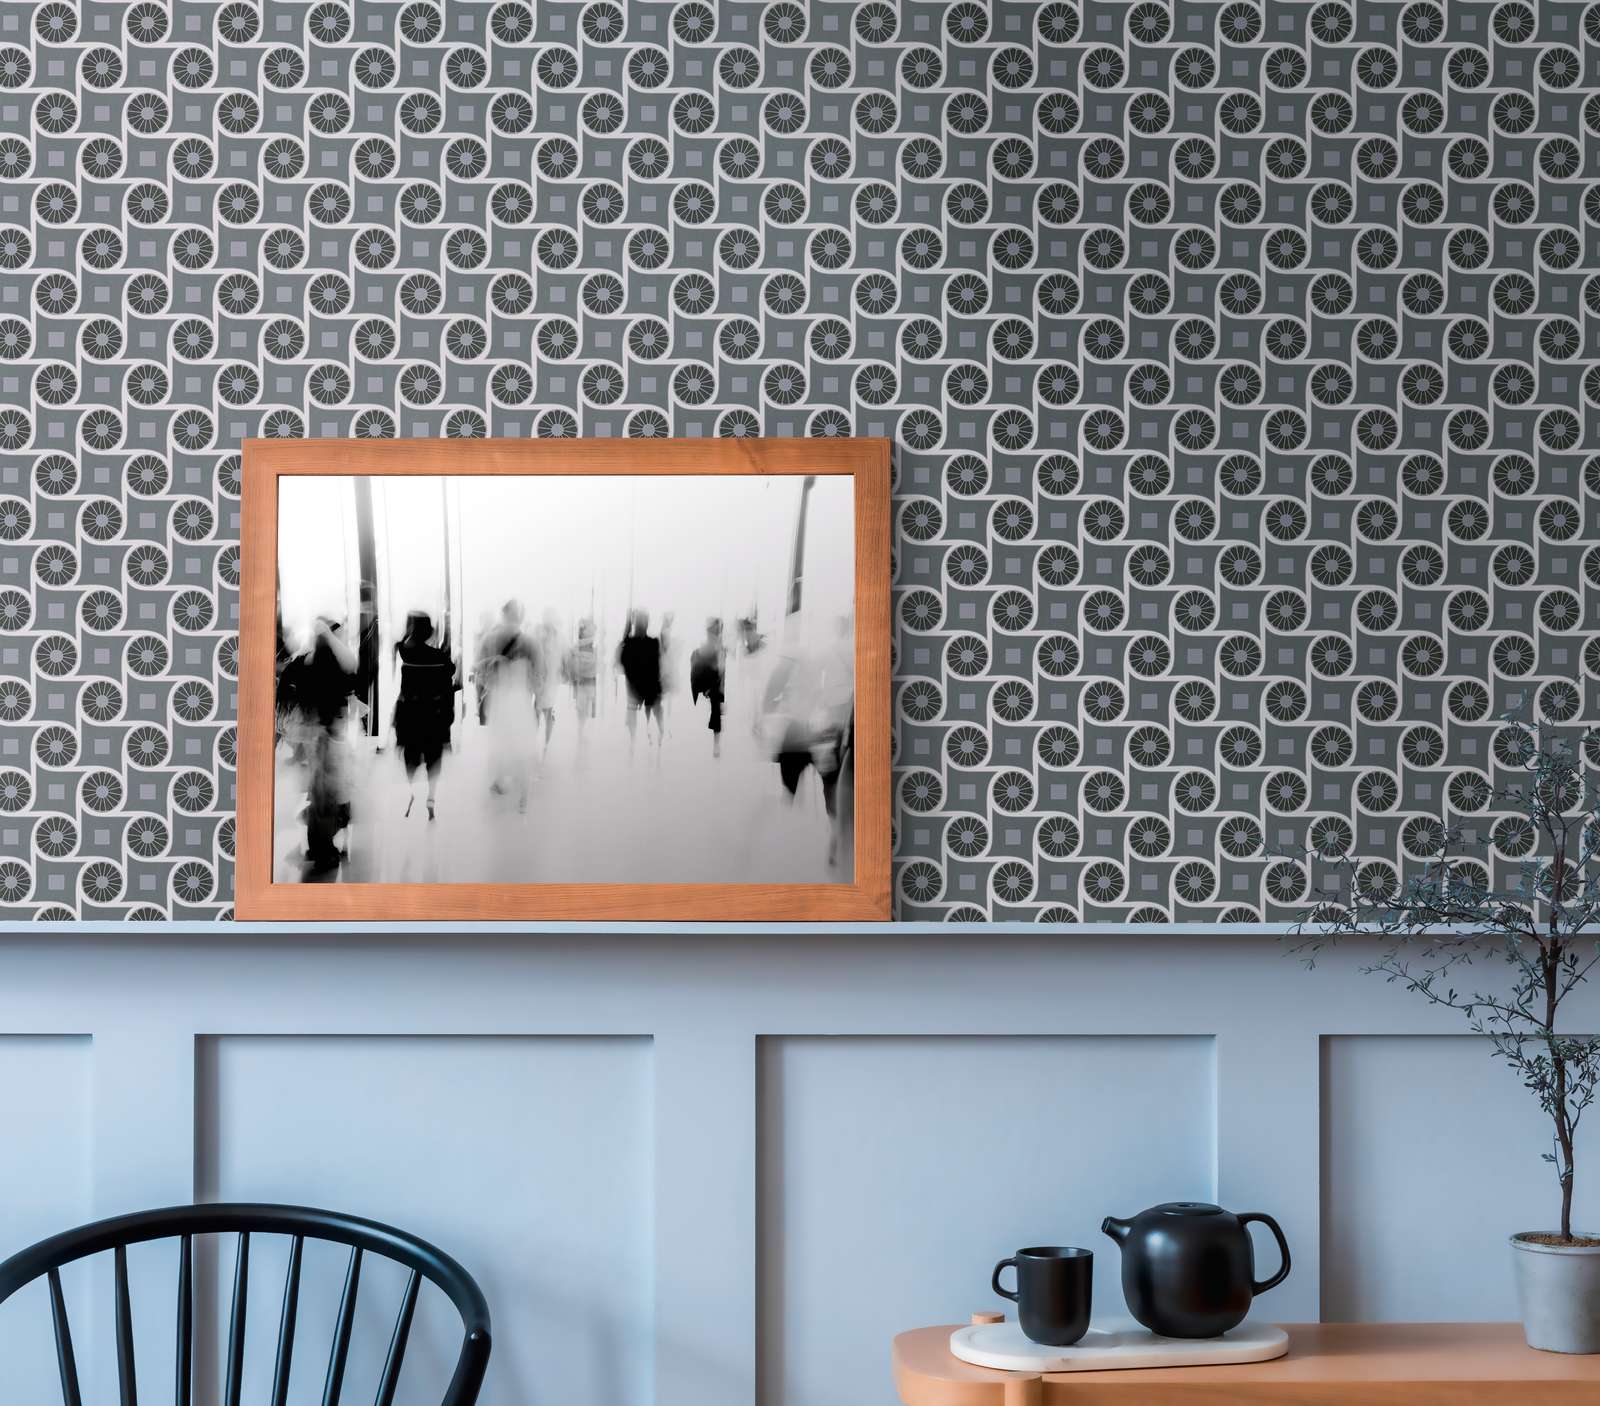             Retro style wallpaper with circle pattern and squares - grey, white, black
        